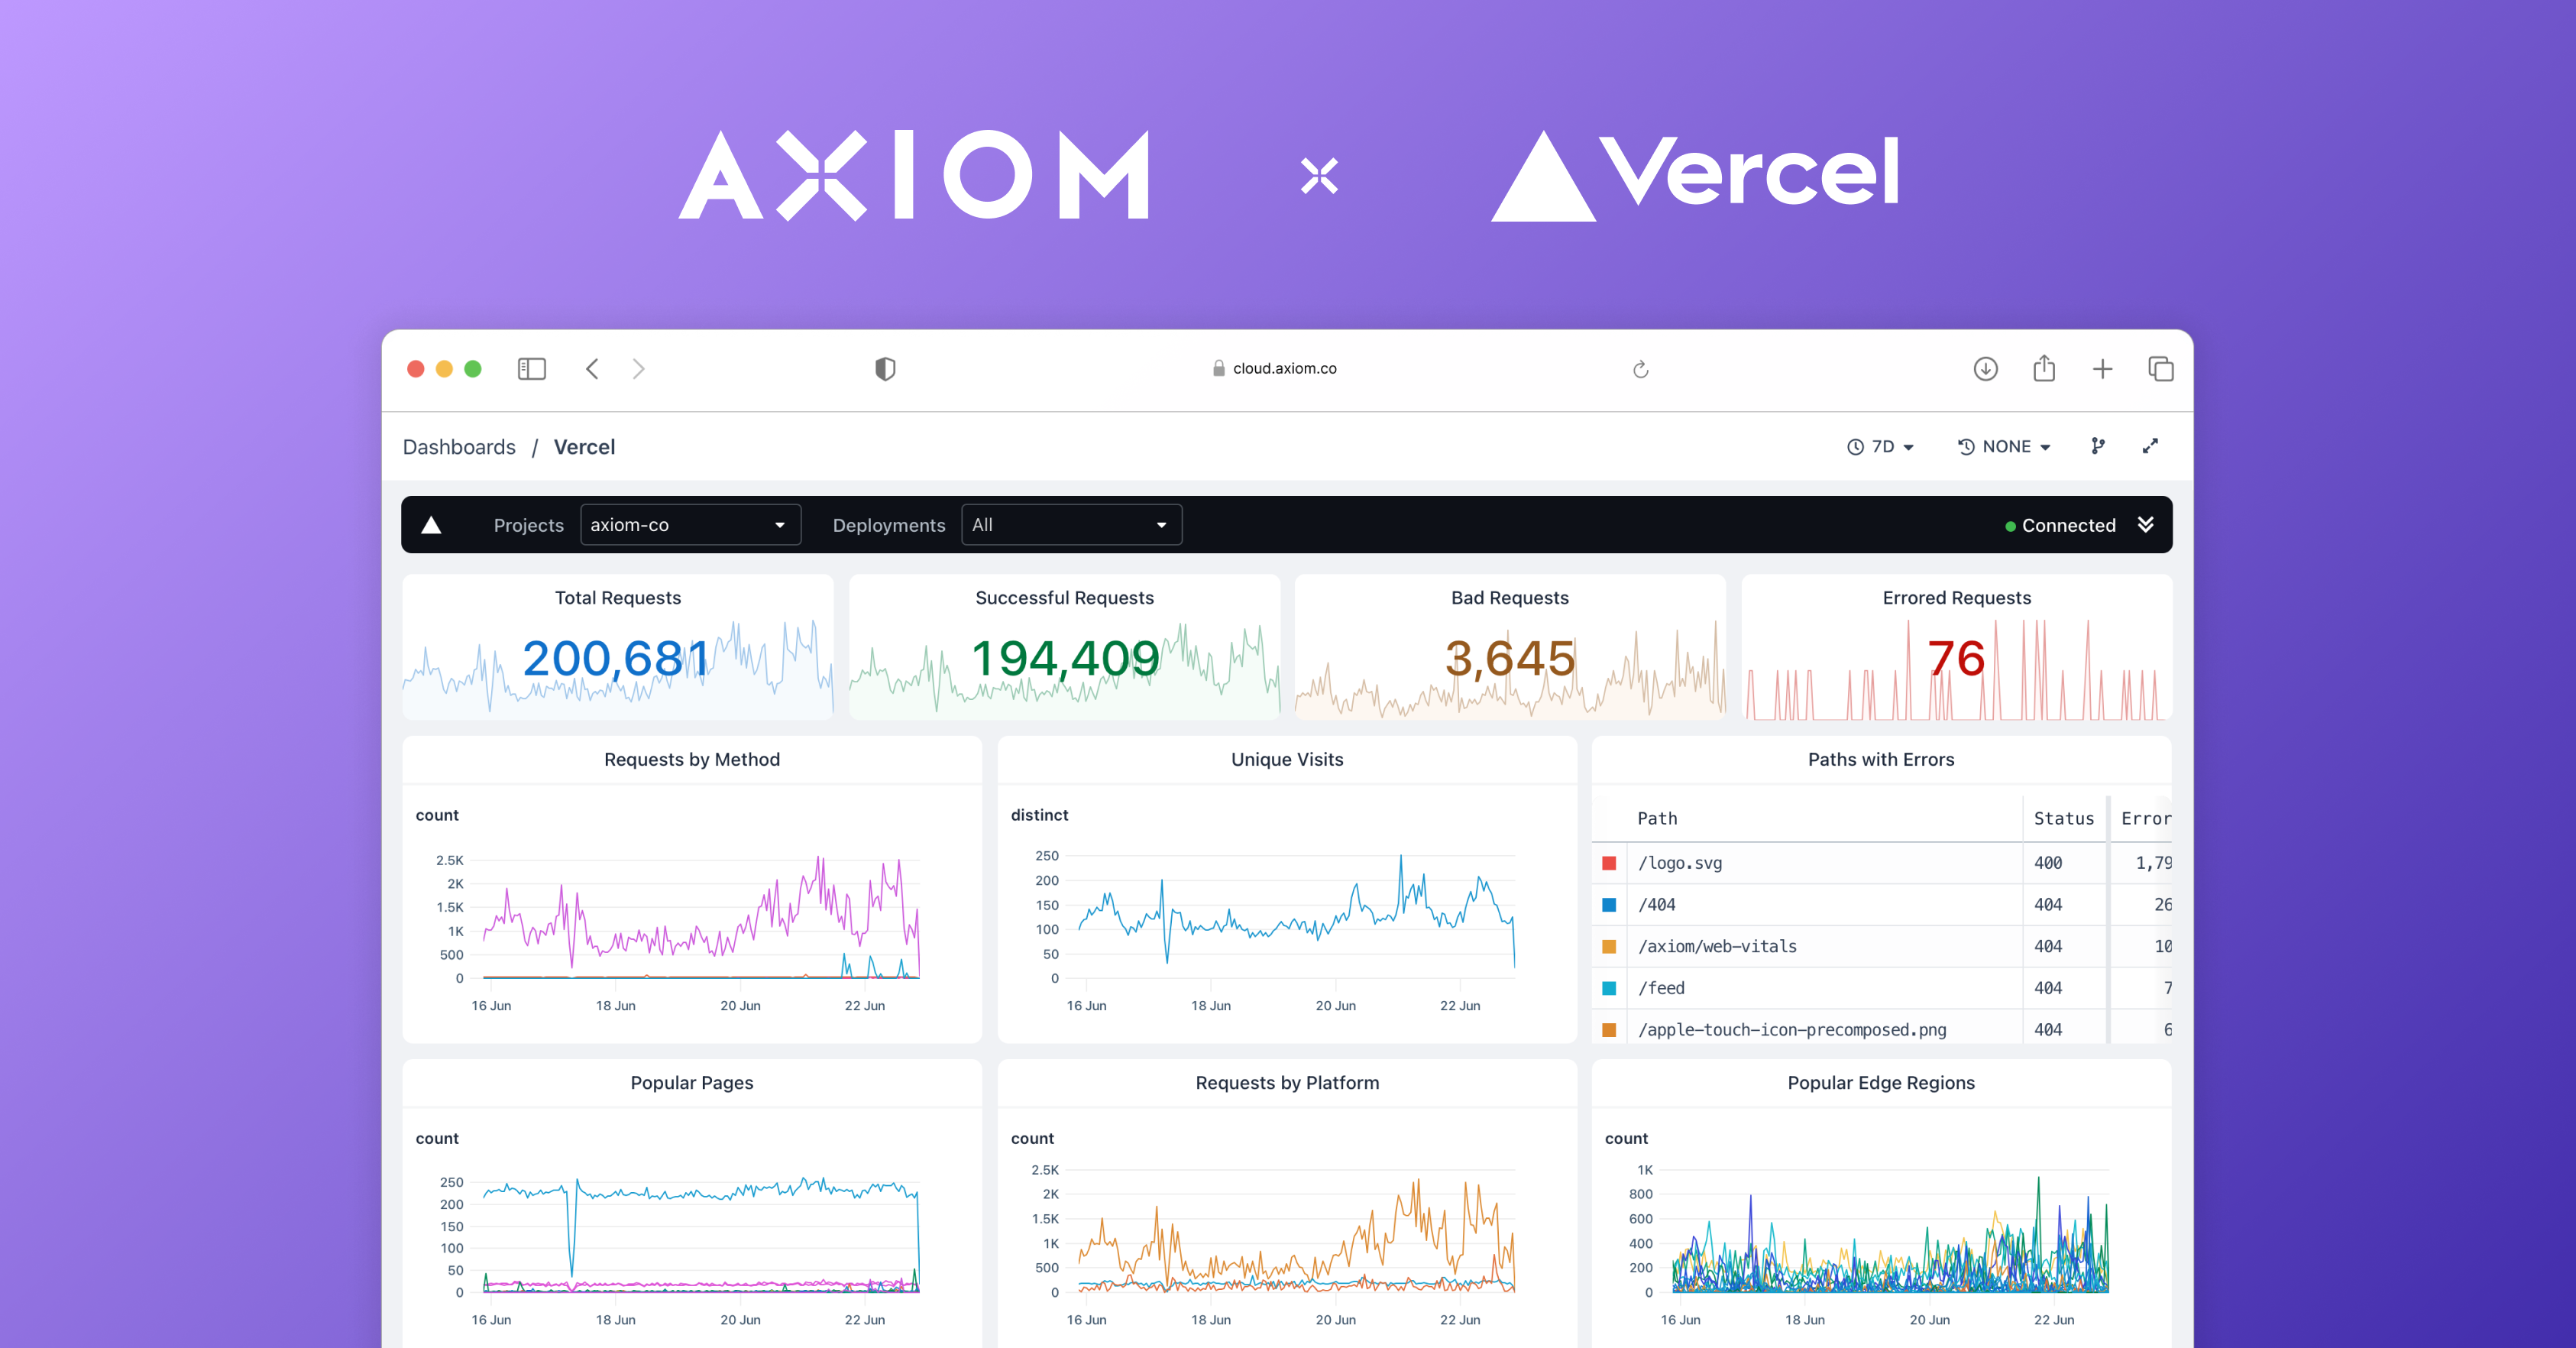 Last month, we announced the Axiom Vercel Integration, providing Vercel users with an in-depth observability experience for their projects and deploym